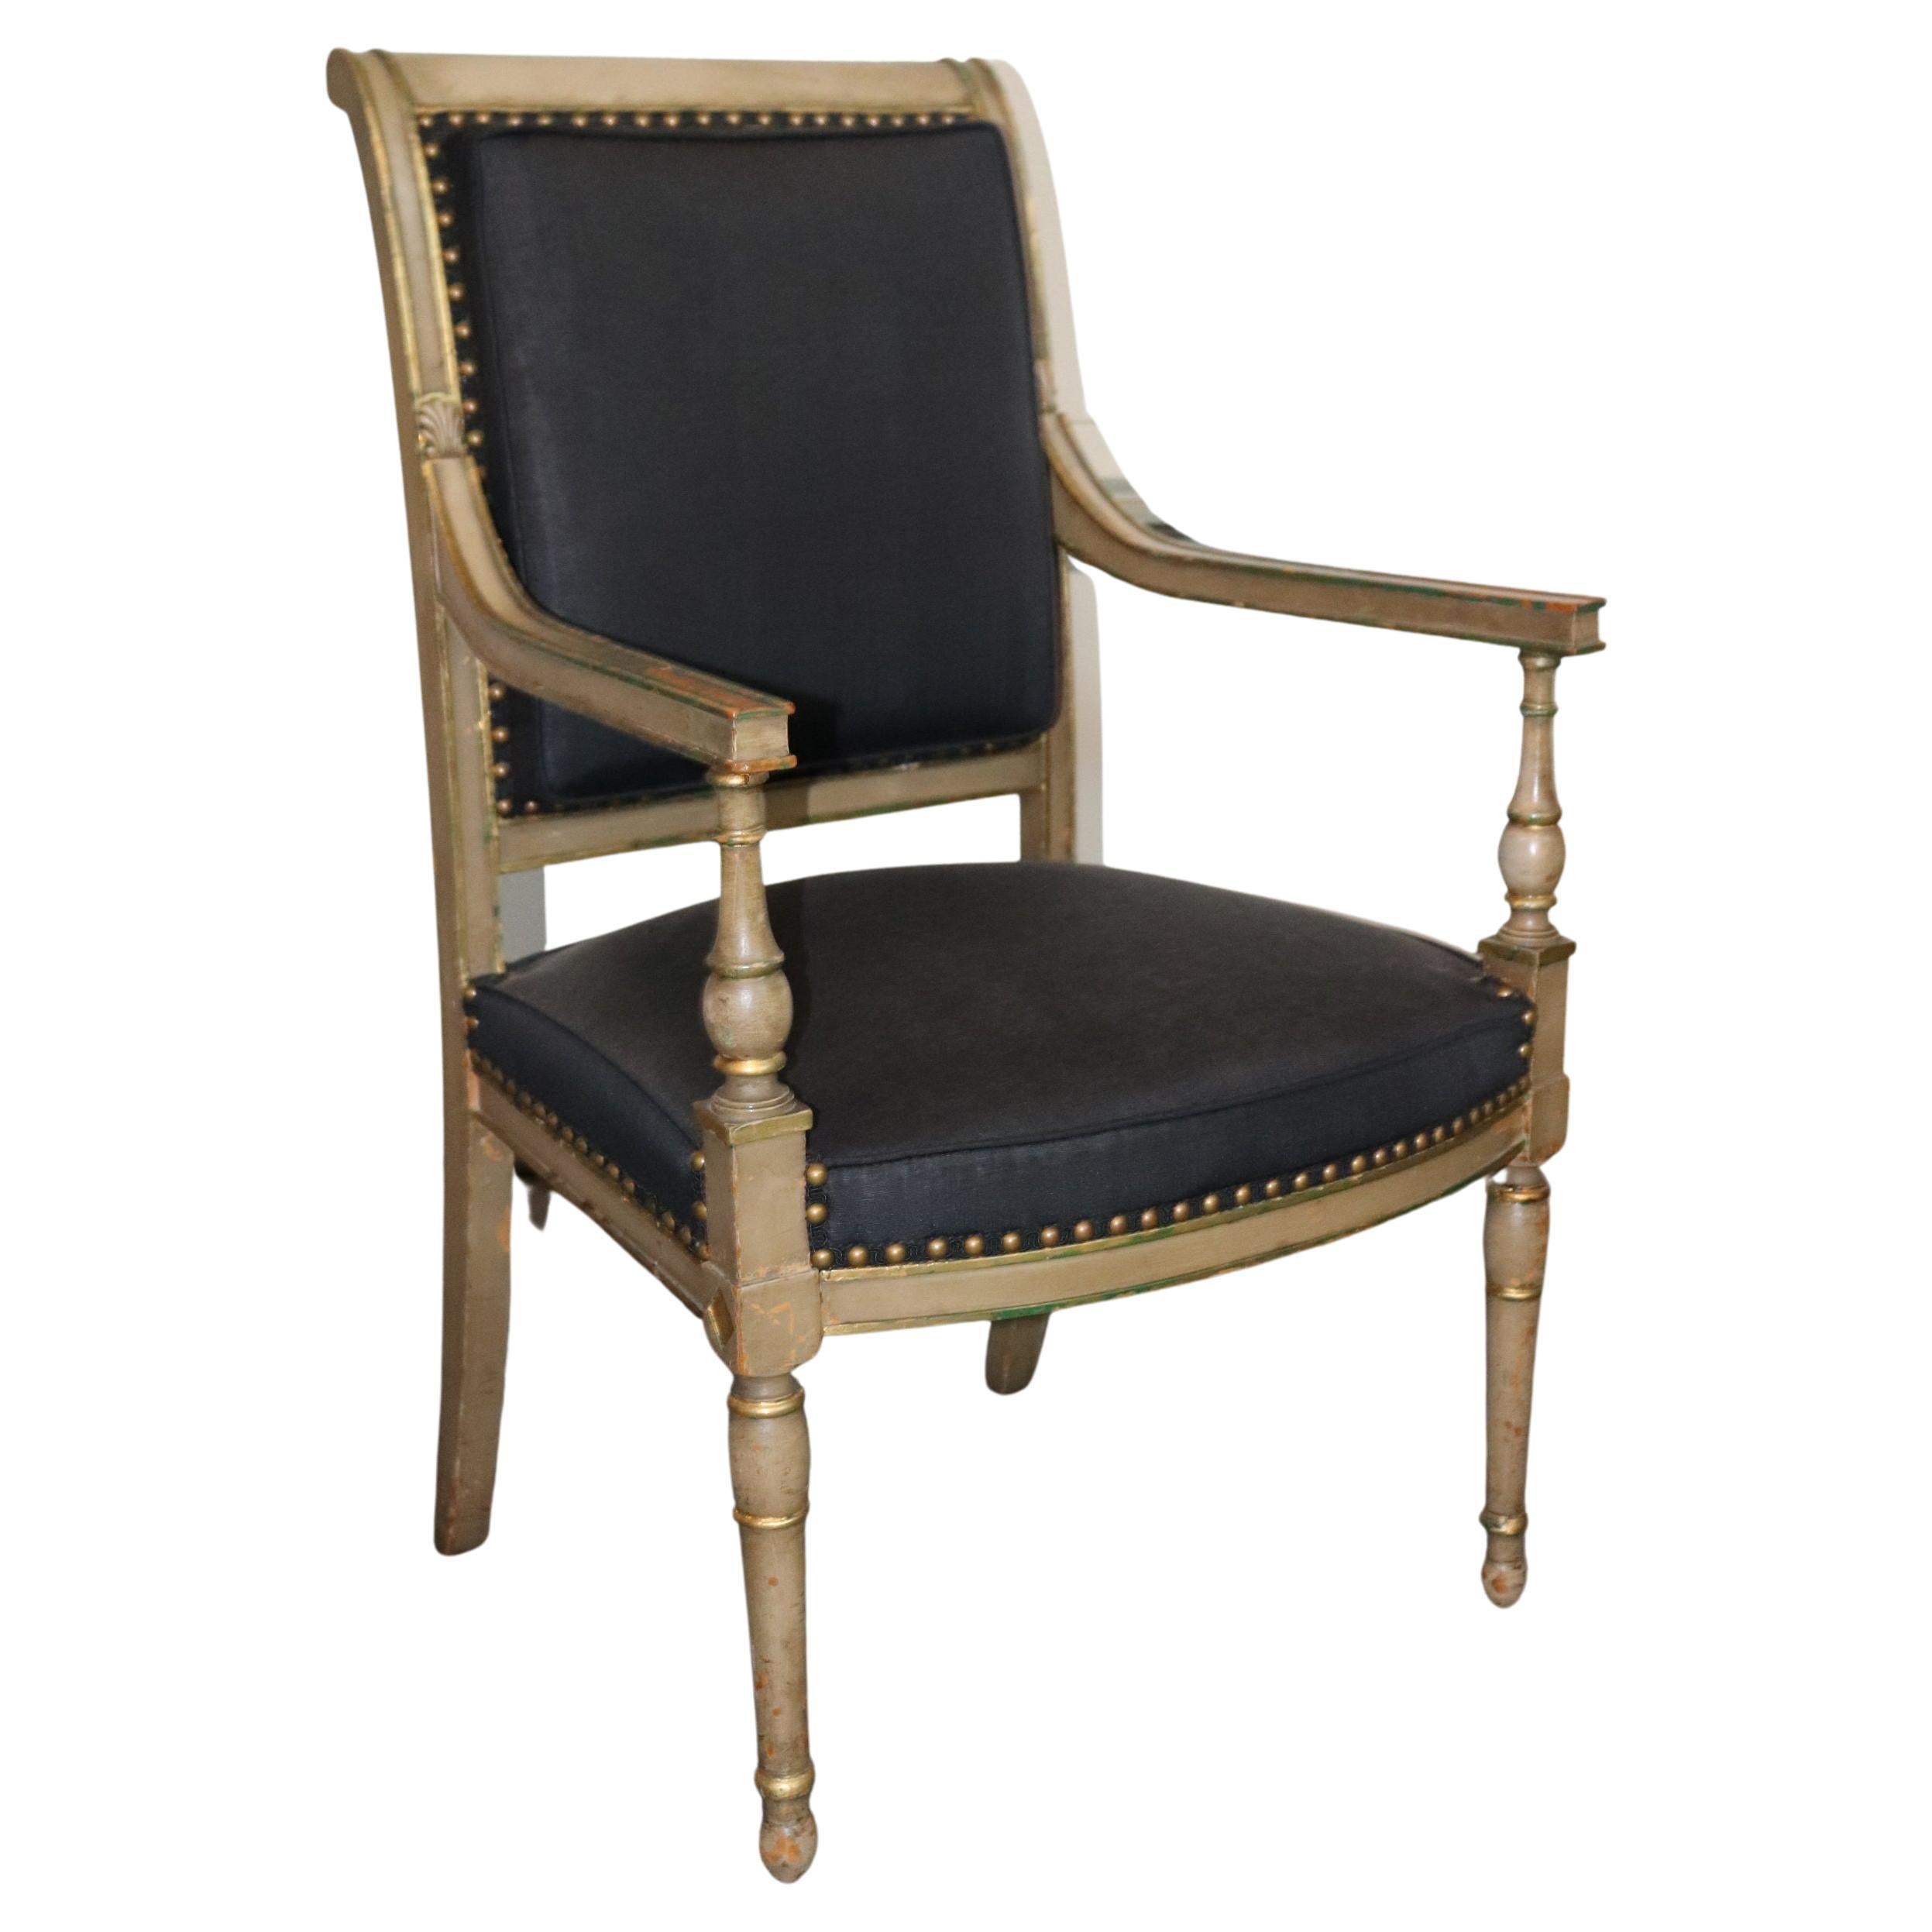 Creme Painted Gilded French Directoire Style Office or Desk Armchair, Circa 1950